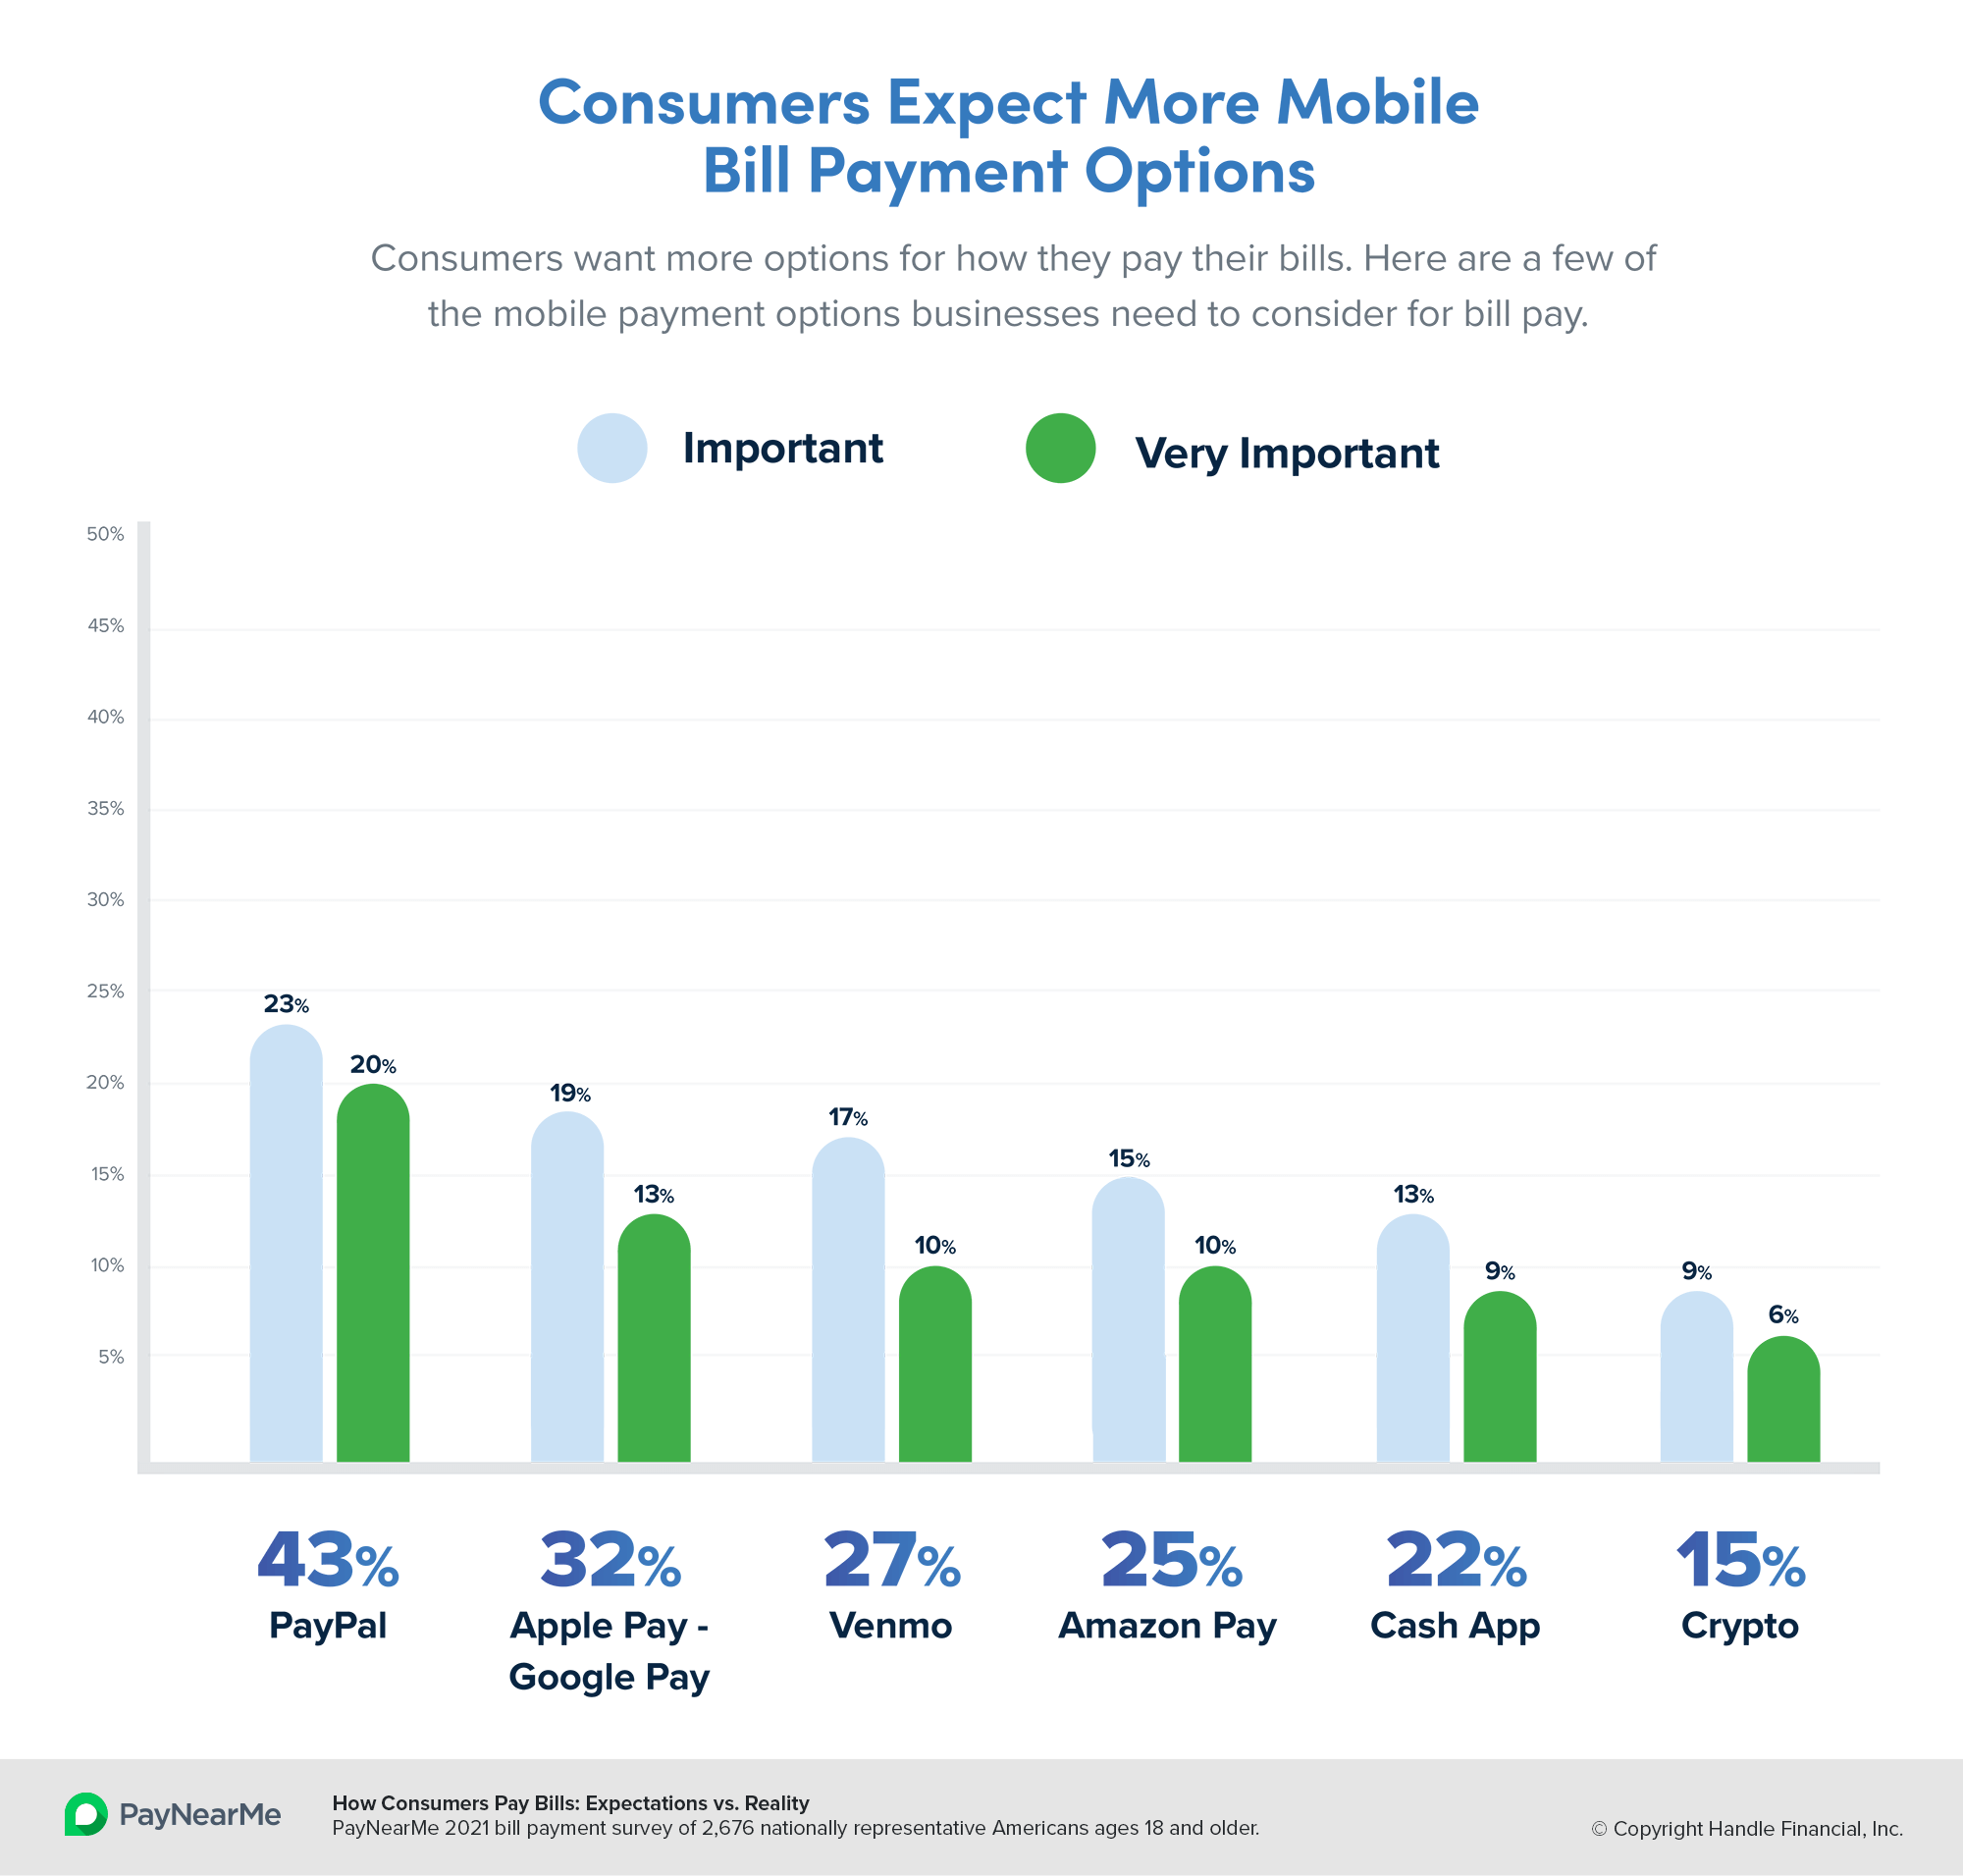 Consumers expect more mobile bill payment options.